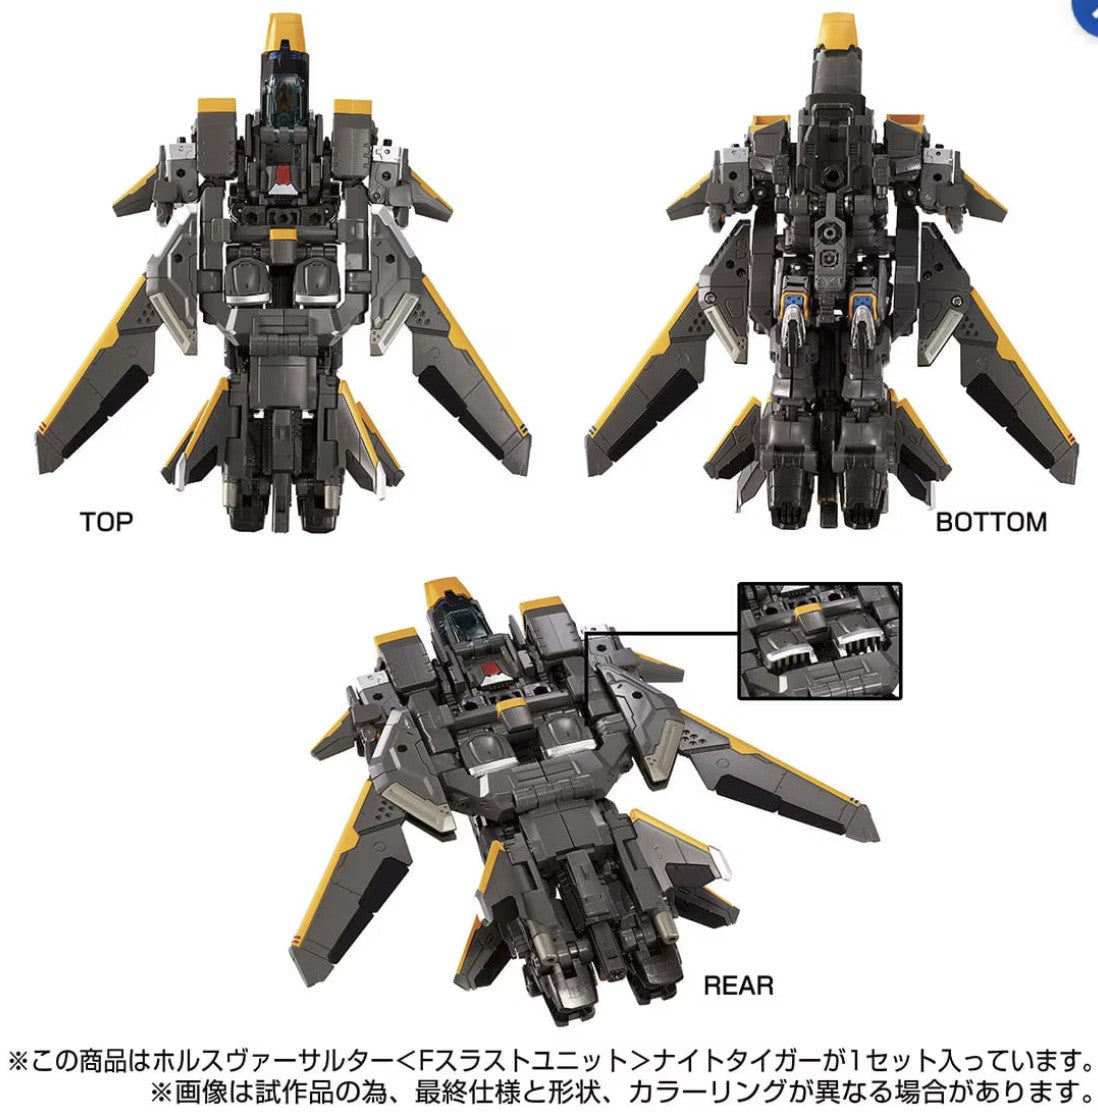 DIACLONE TM-29 TACTICAL MOVER HORUS VERSAULTER <F THRUST UNIT> NIGHT TIGER (TTMALL EXCLUSIVE) showing jet mode gimmick